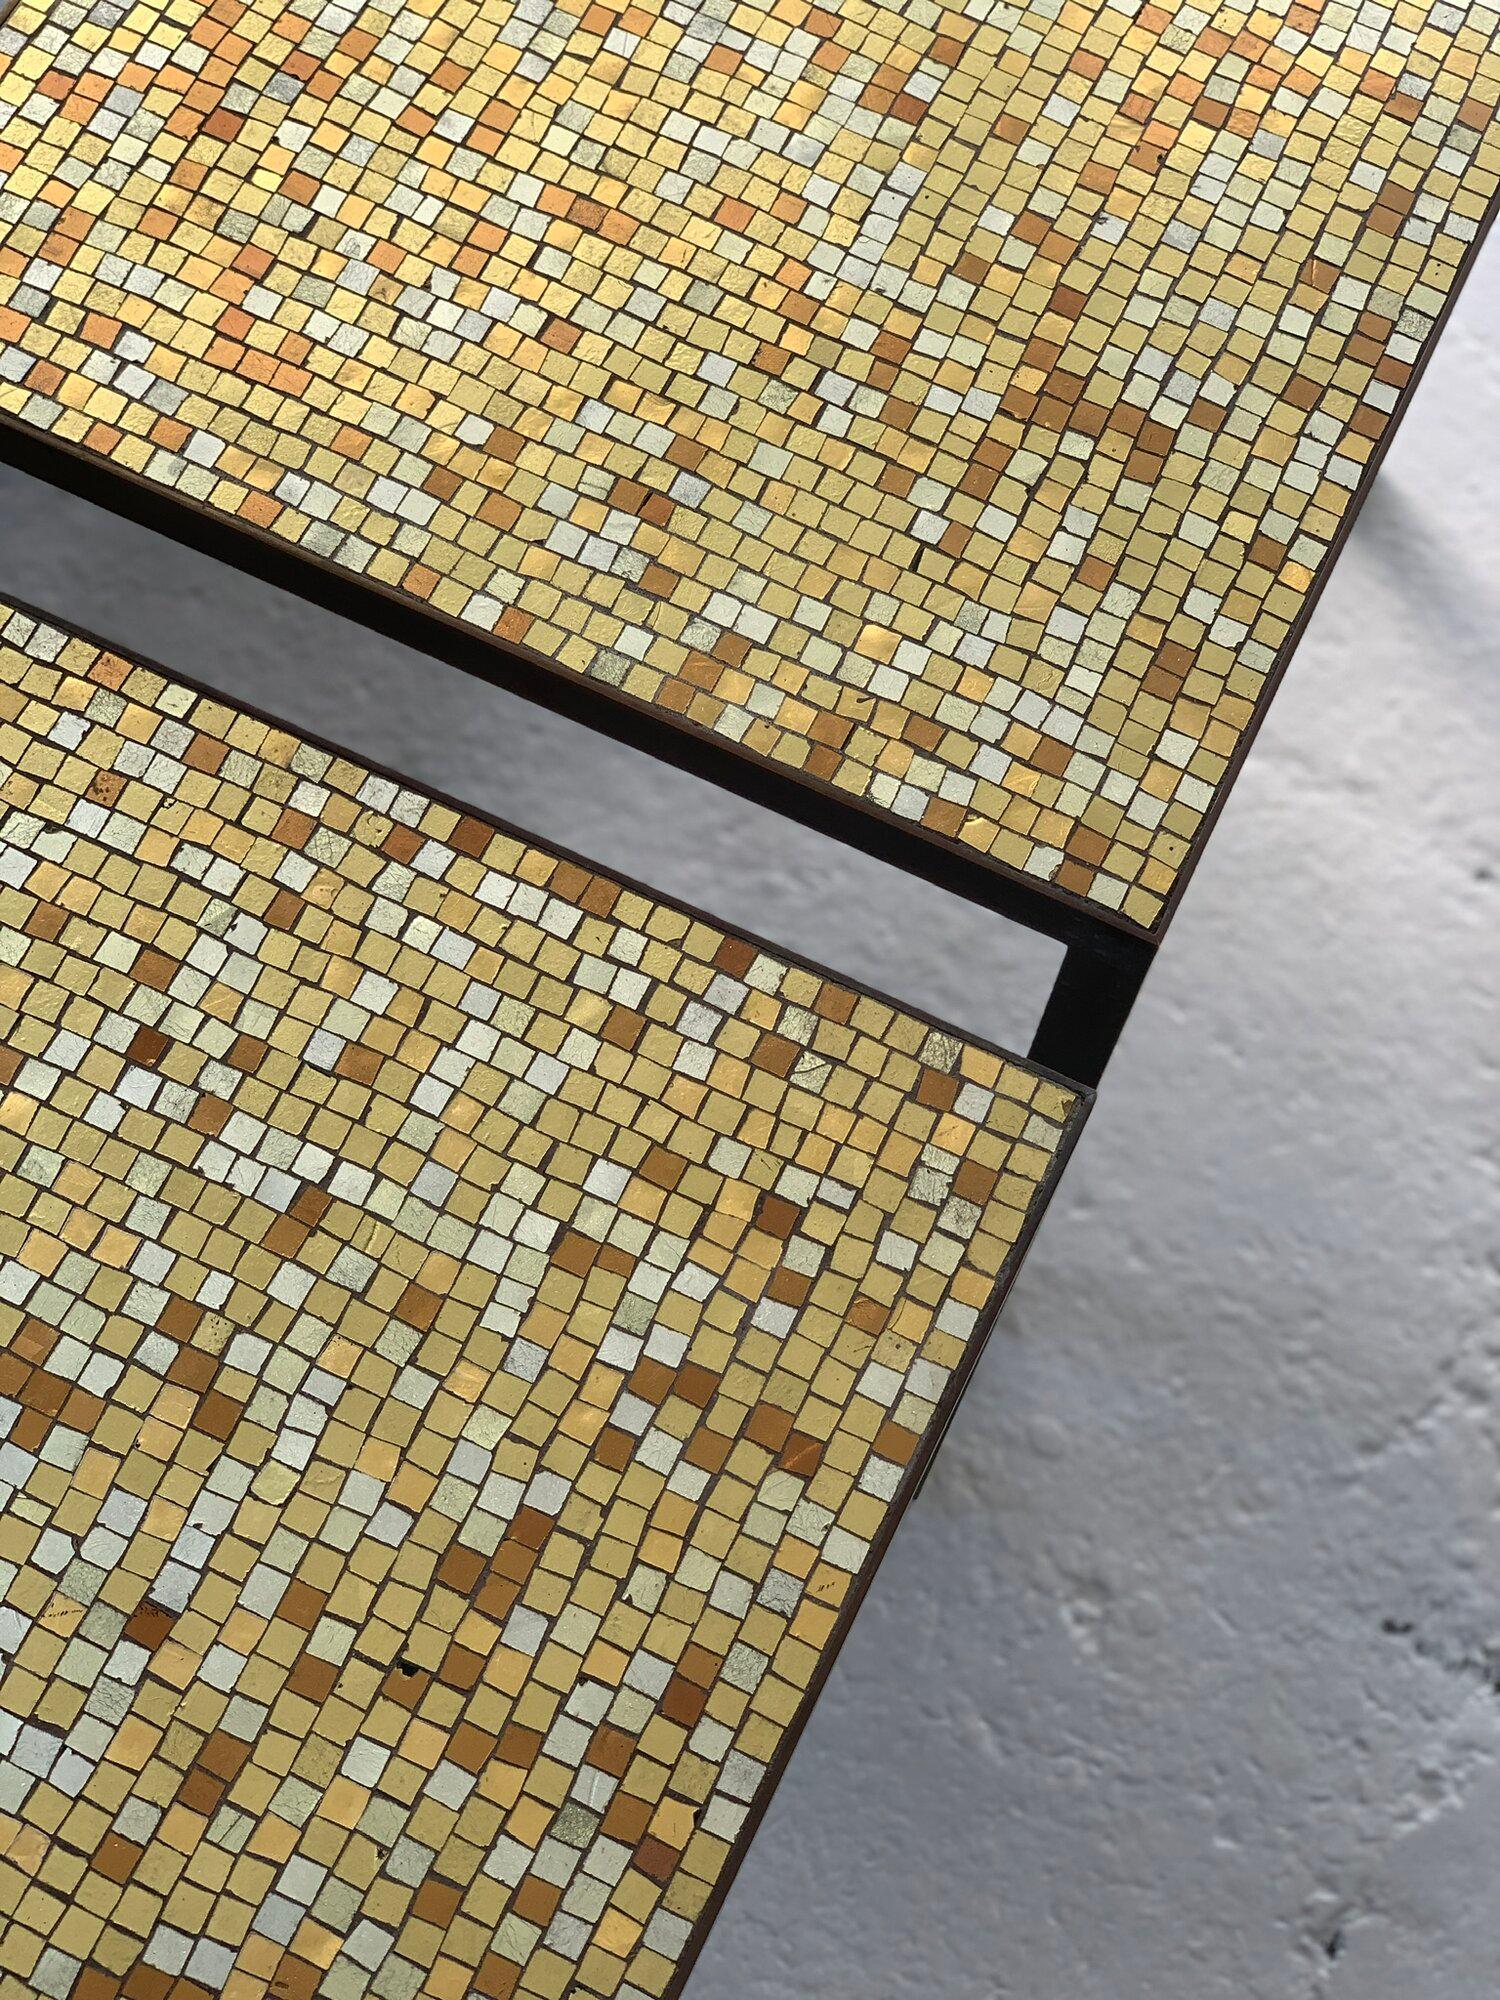 Rare Vintage Hollywood Regency Brass Frame and Glass Metallic Mosaic Tile Tables For Sale 2